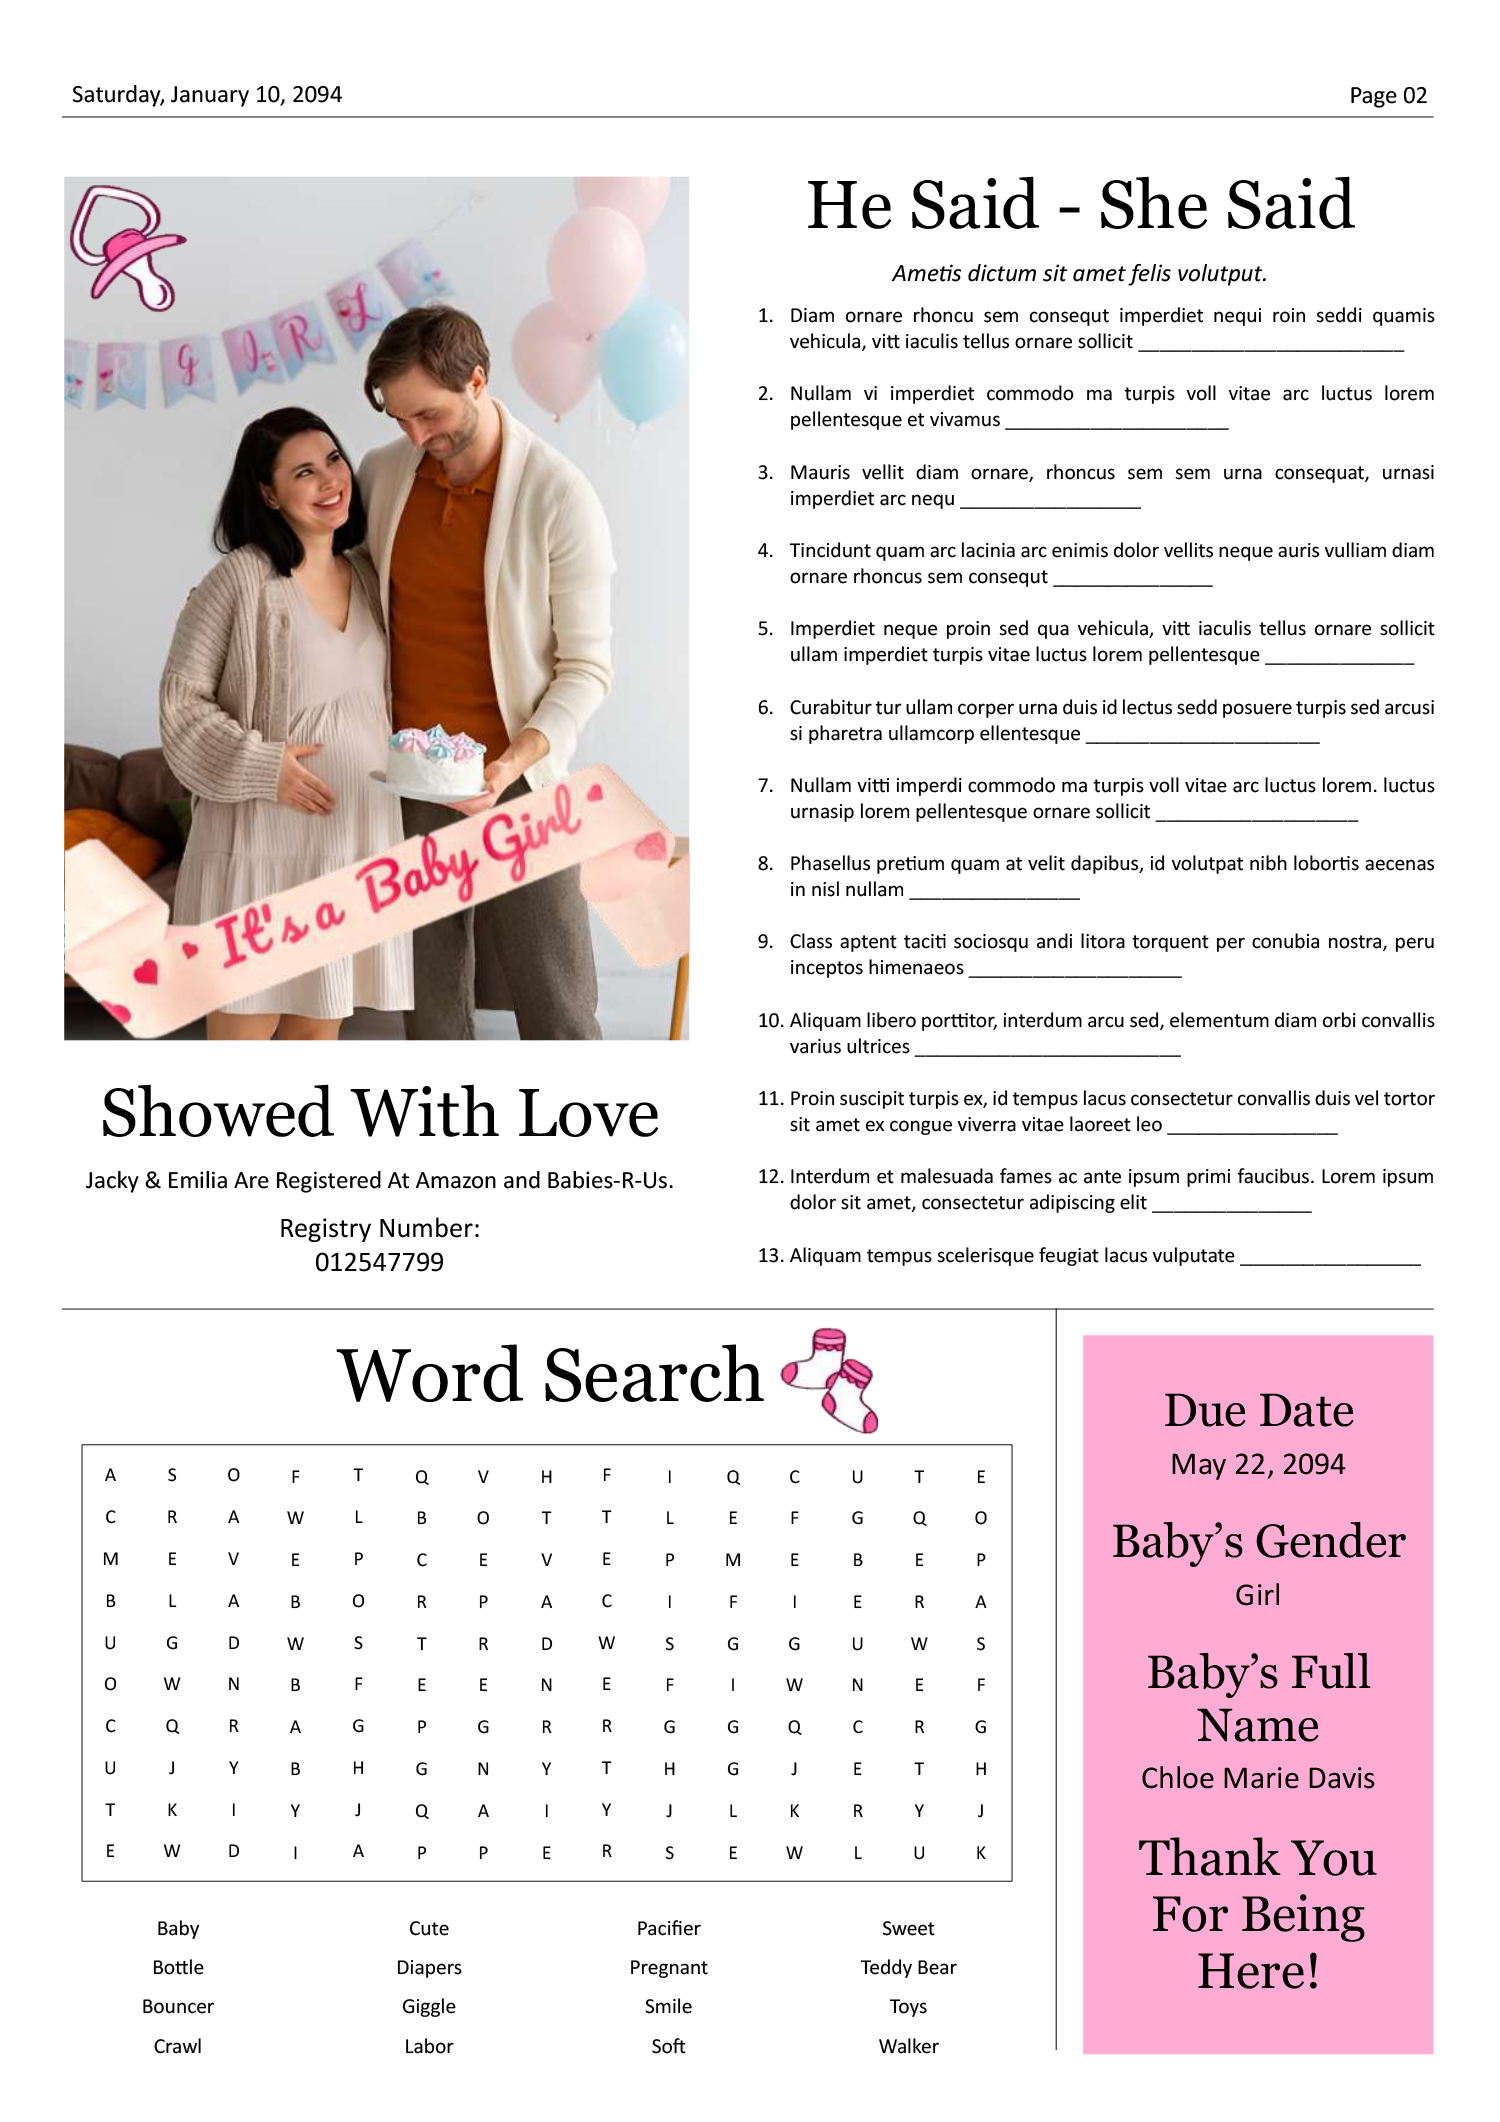 Baby Shower Newspaper Program Template - Page 02